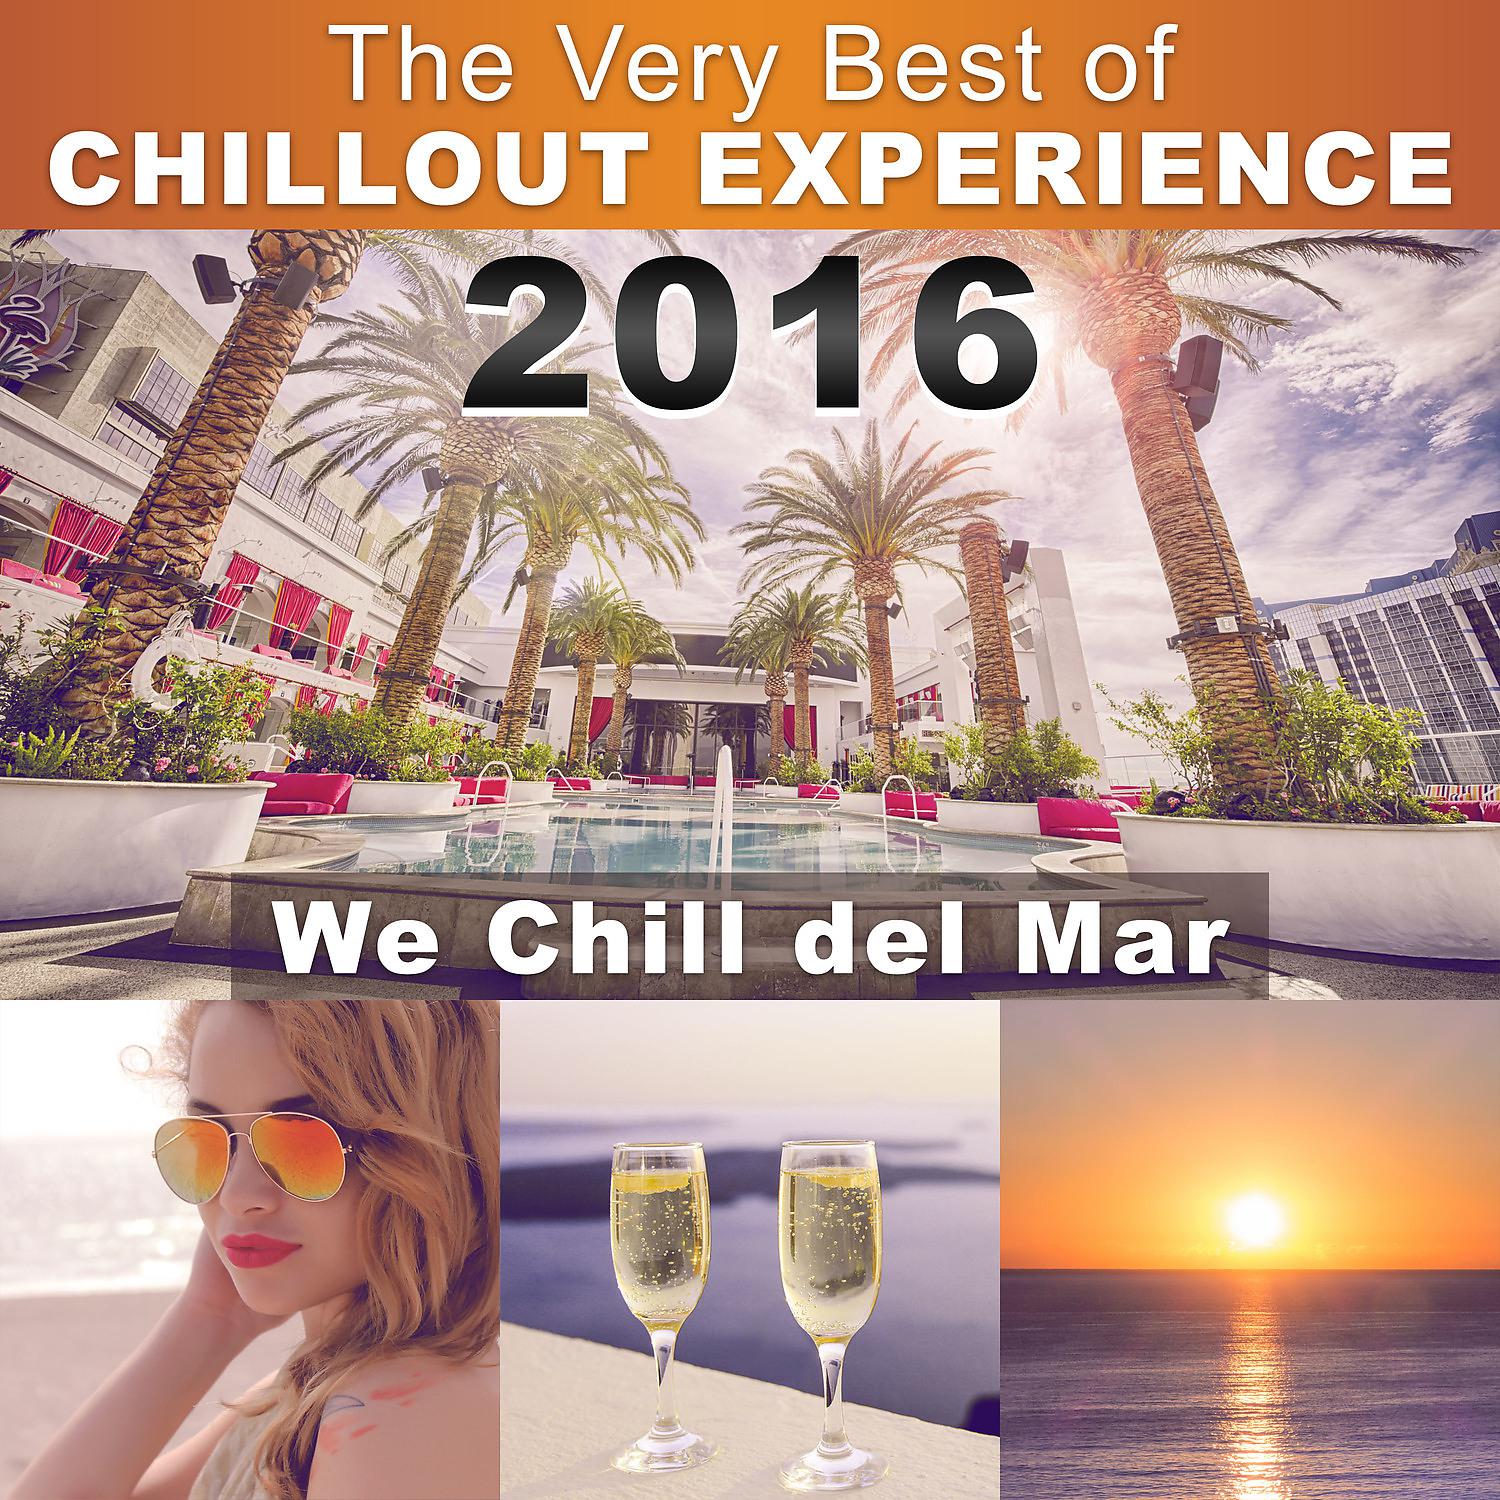 Постер альбома The Very Best of Chillout Experience 2016: Lounge & Music Club, Hotel, Spa (We Chill del Mar) Summer, Beach, Pool and Cocktail Party Time 2016: Lounge & Music Club, Hotel, Spa (We Chill del Mar) Summer, Beach, Pool and Cocktail Party Time